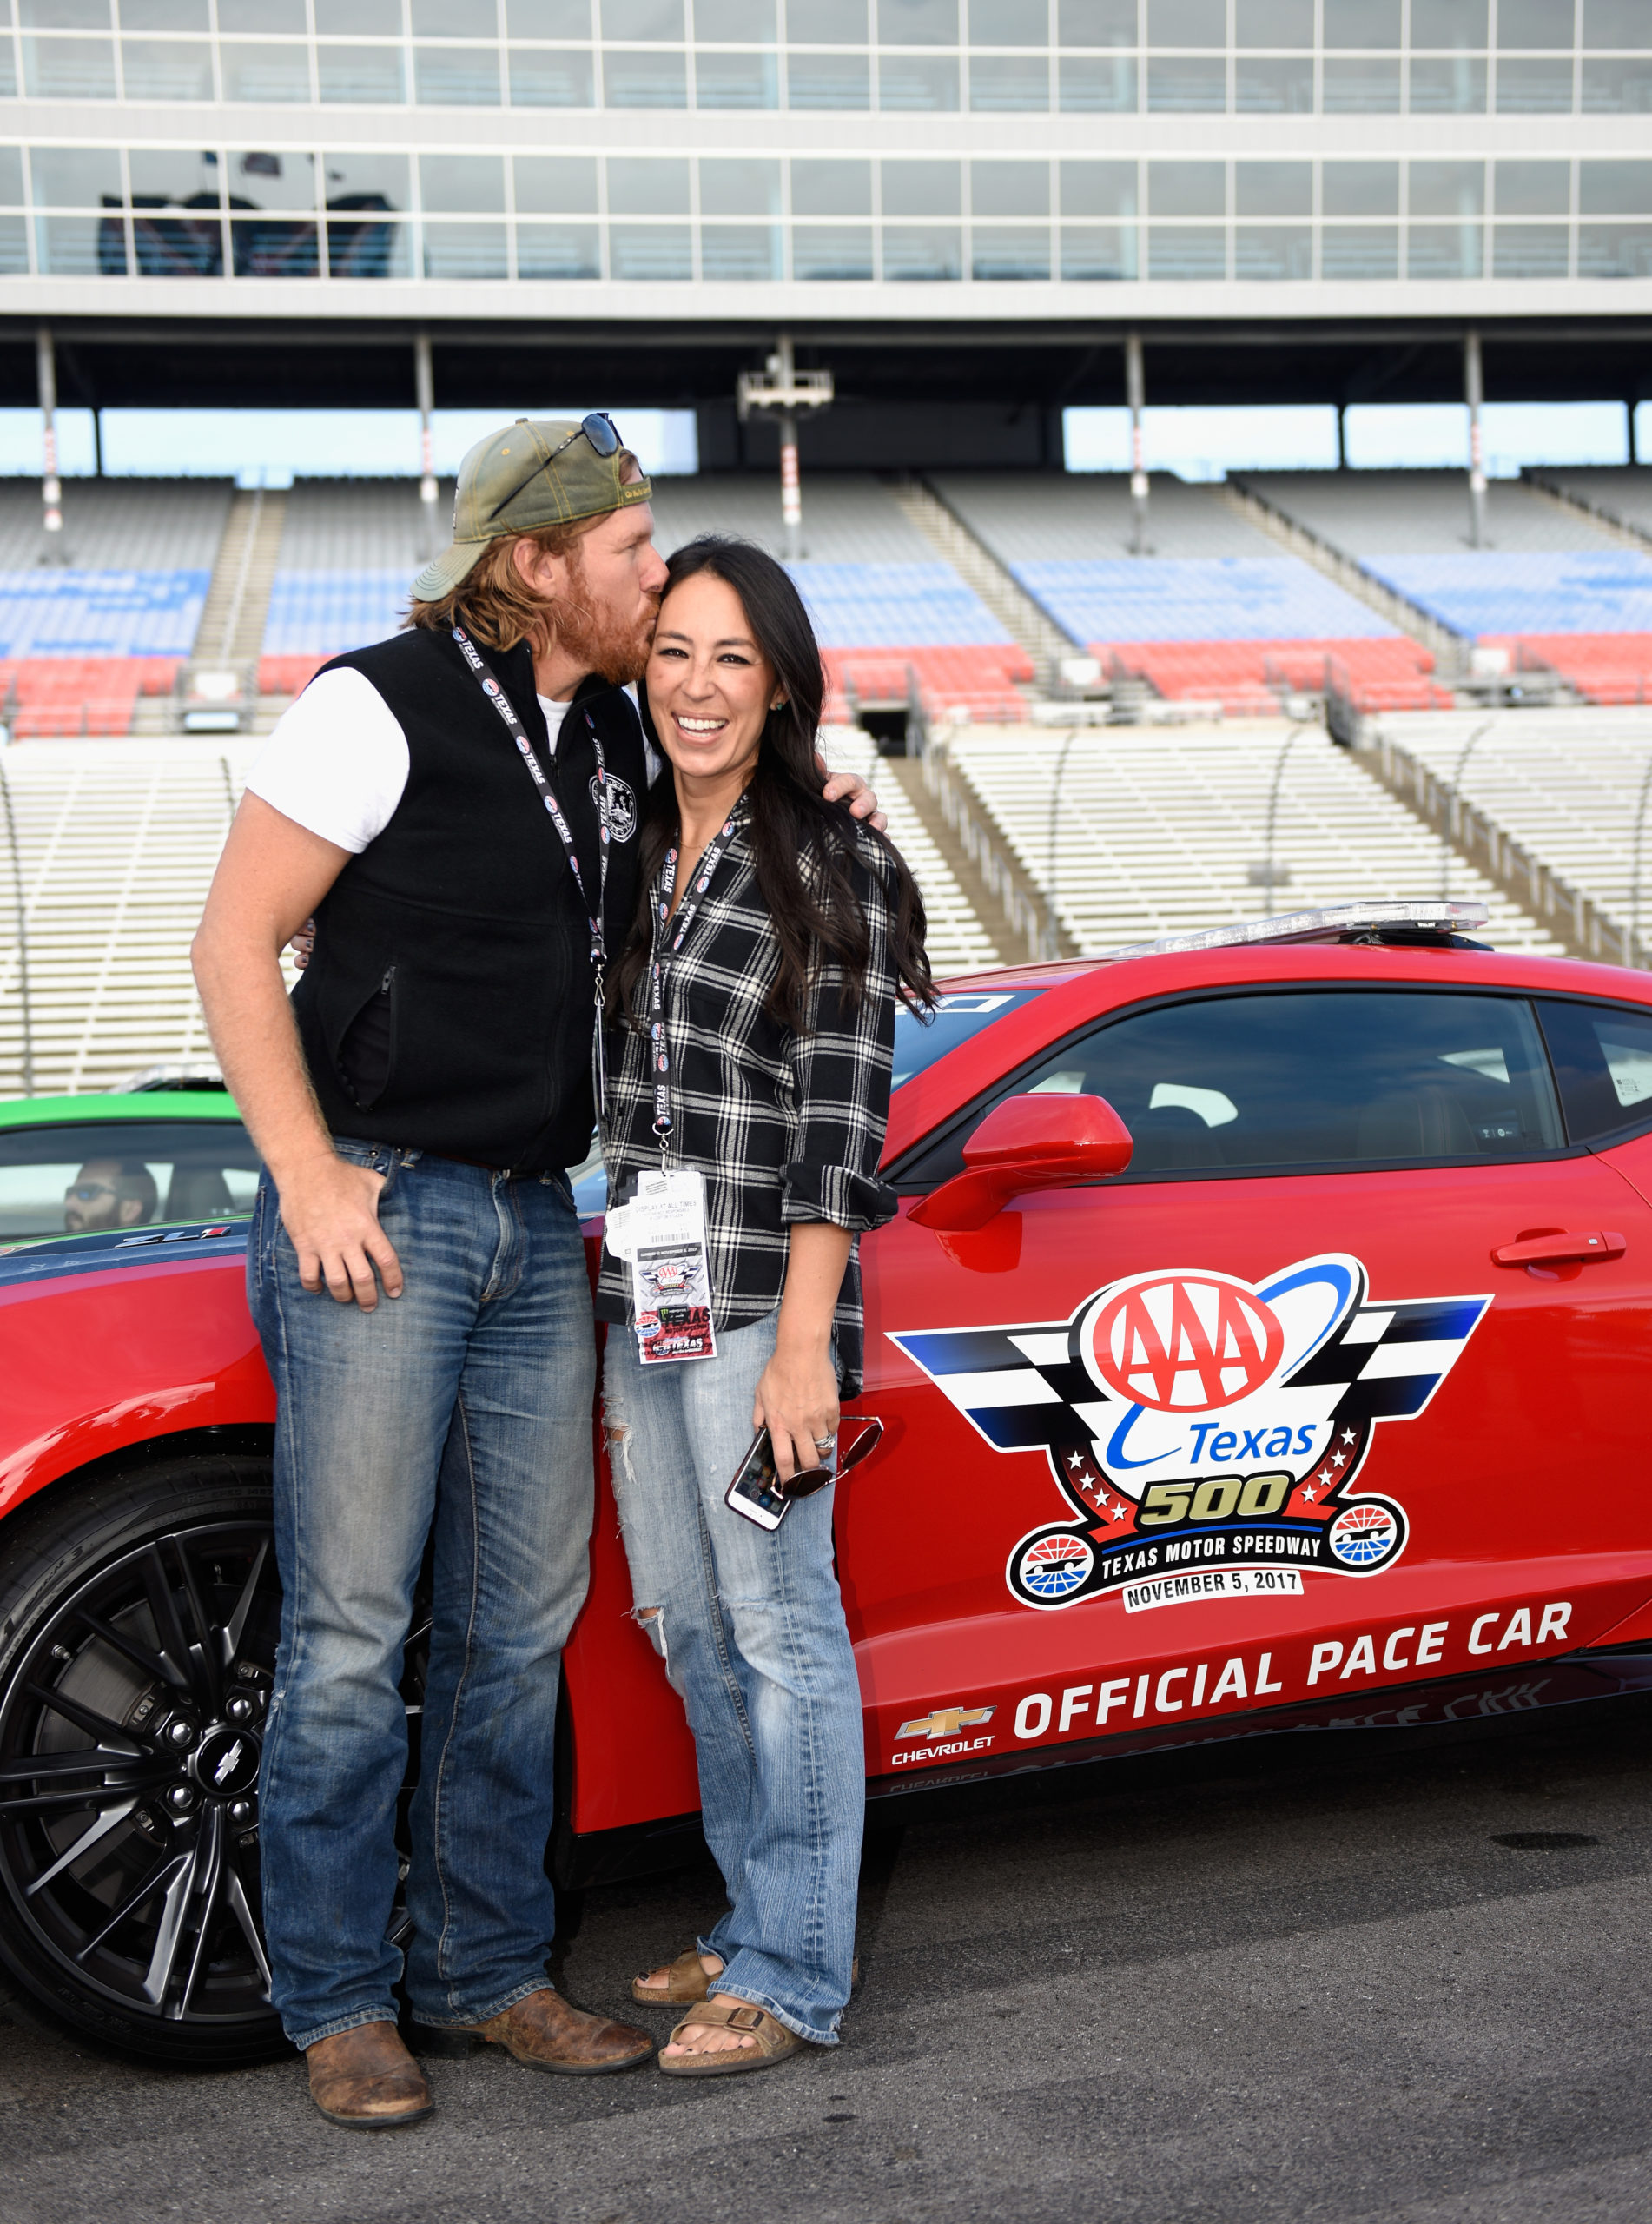 'Fixer Upper' stars Chip and Joanna Gaines pose with the Monster Energy NASCAR Cup Series AAA Texas 500 pace car at Texas Motor Speedway on November 5, 2017 in Fort Worth, Texas. (Photo by Jared C. Tilton/Getty Images)